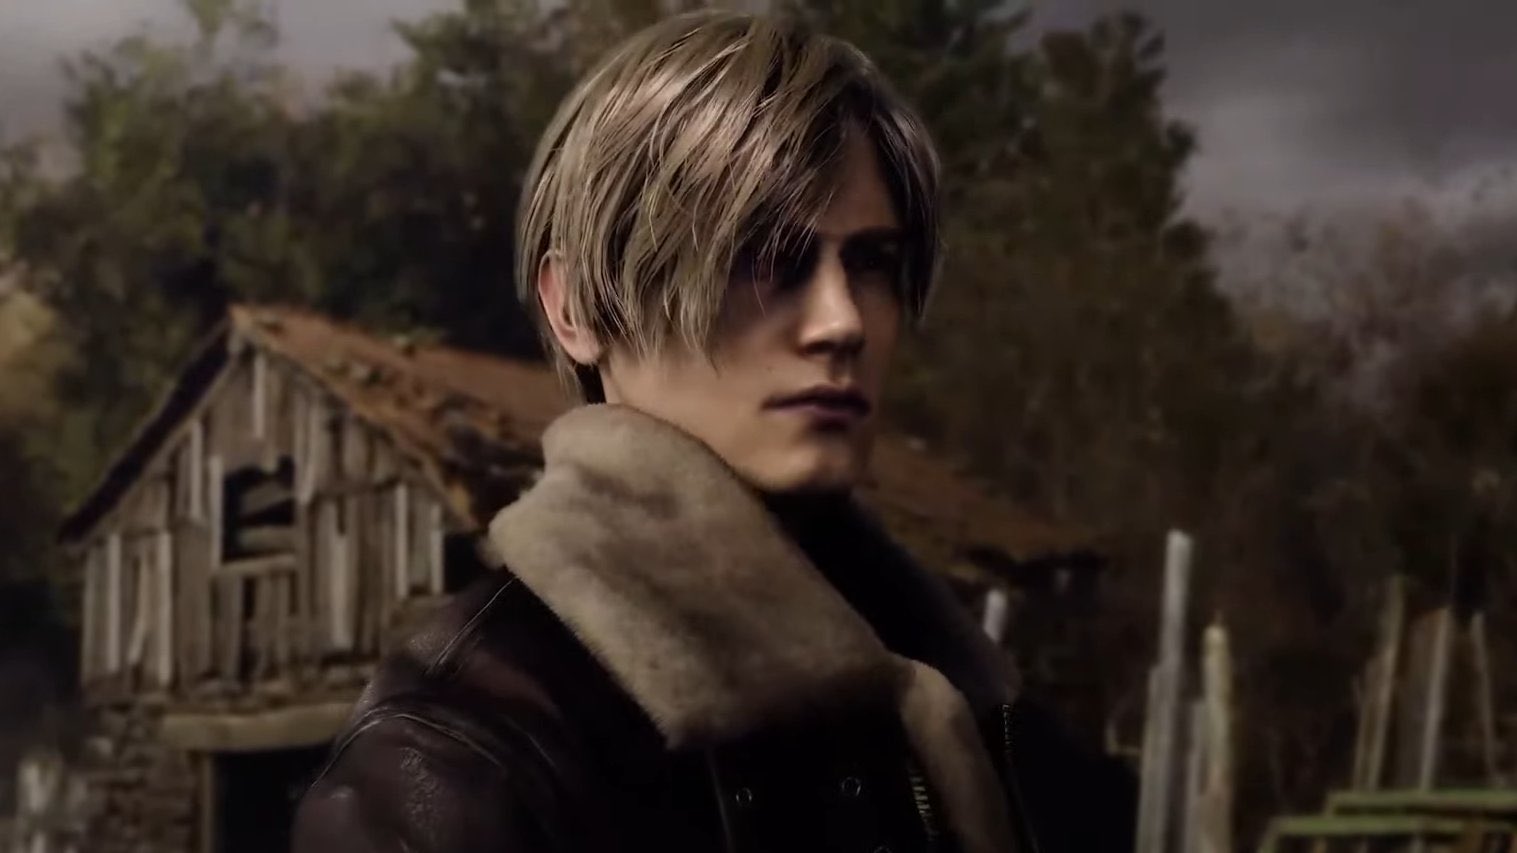 Jen 🏳️‍🌈 on X: The absolutely gorgeous Resident Evil remake